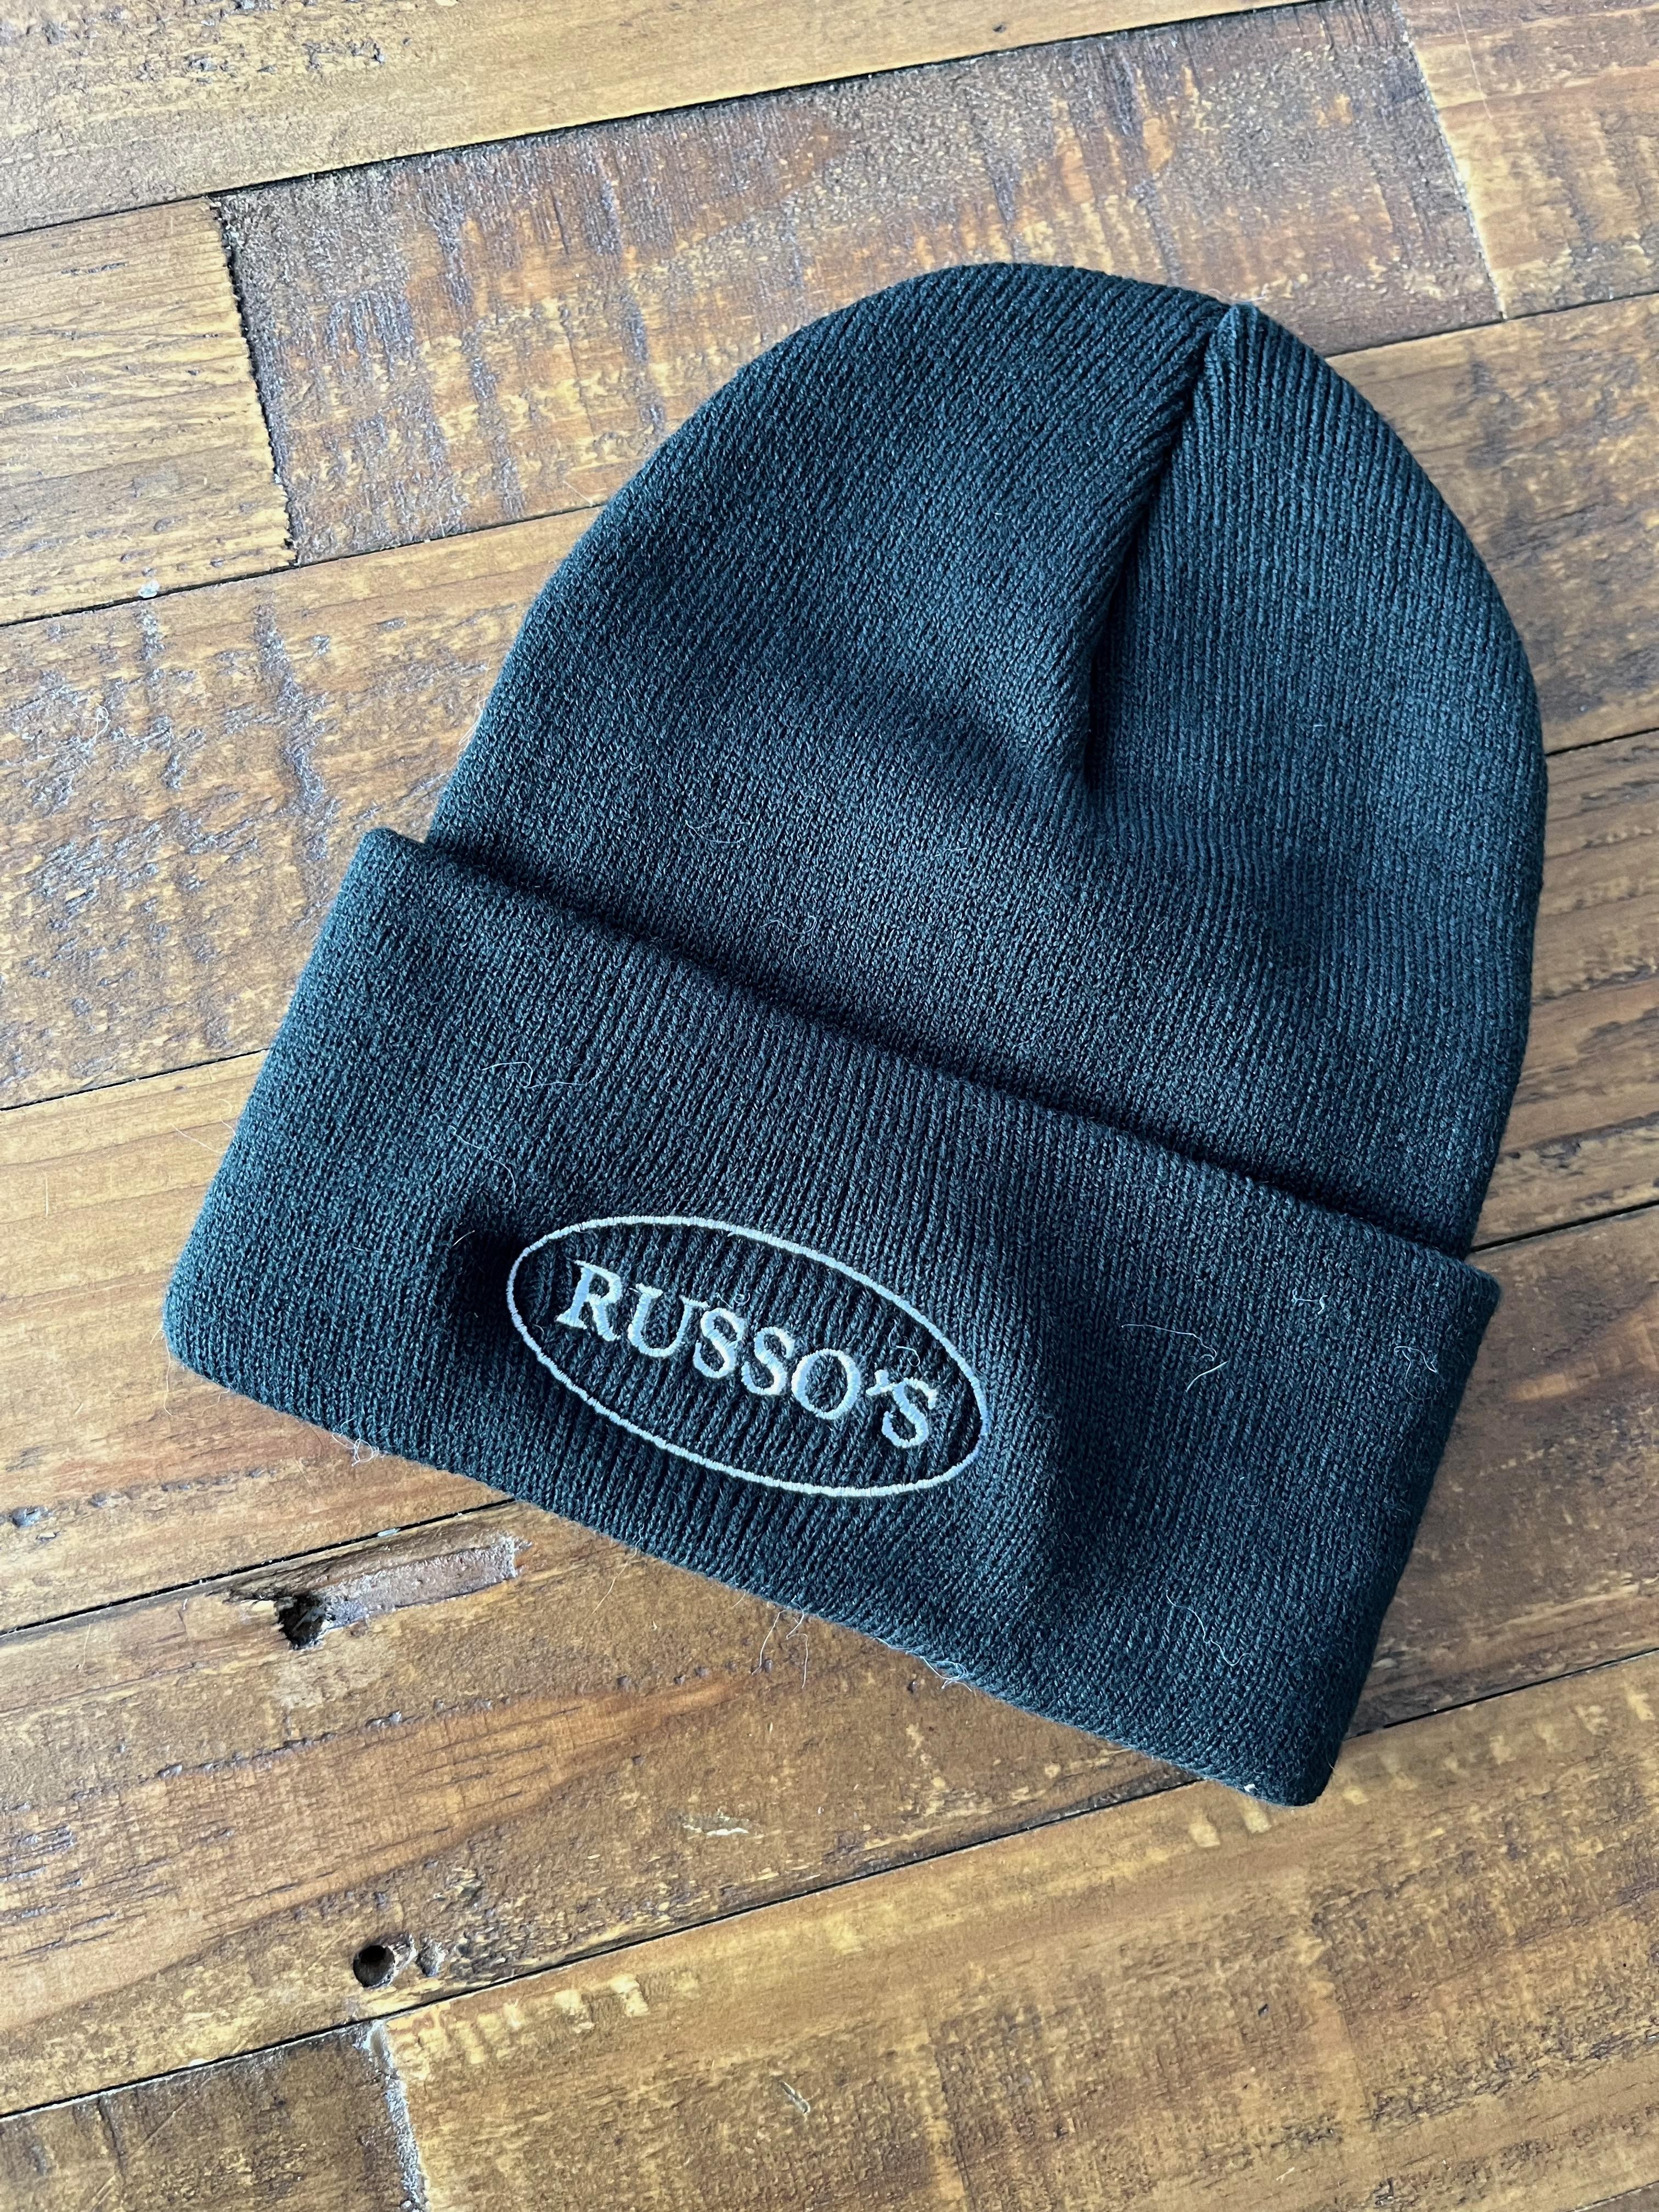 Russo's Beanie Hat